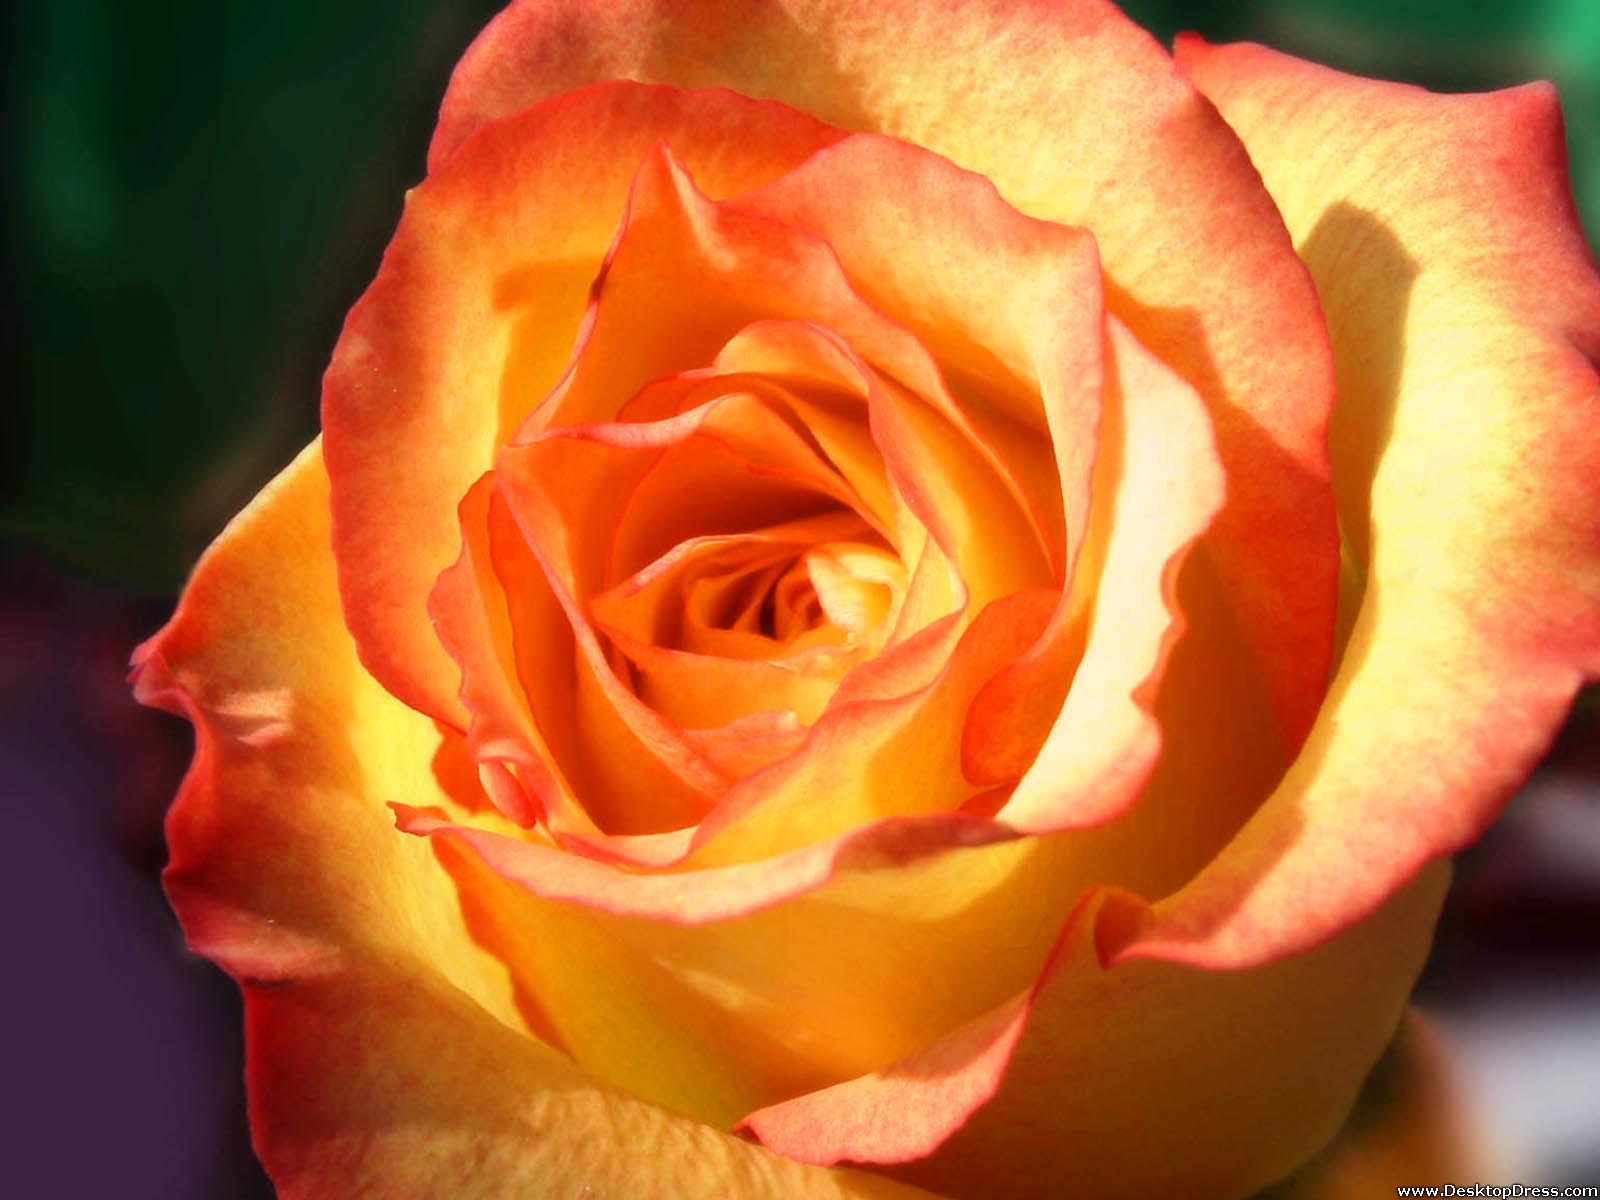 Desktop Wallpapers » Flowers Backgrounds » Yellow and Orange Rose ...